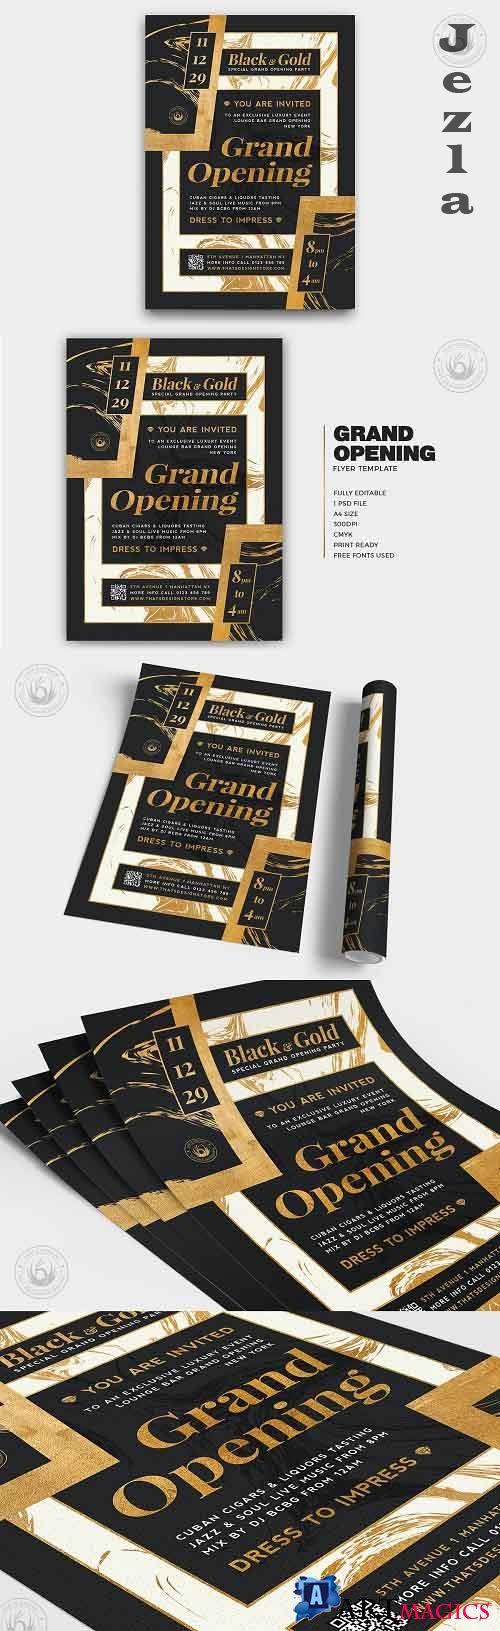 Grand Opening Flyer Template V3 - 5499182